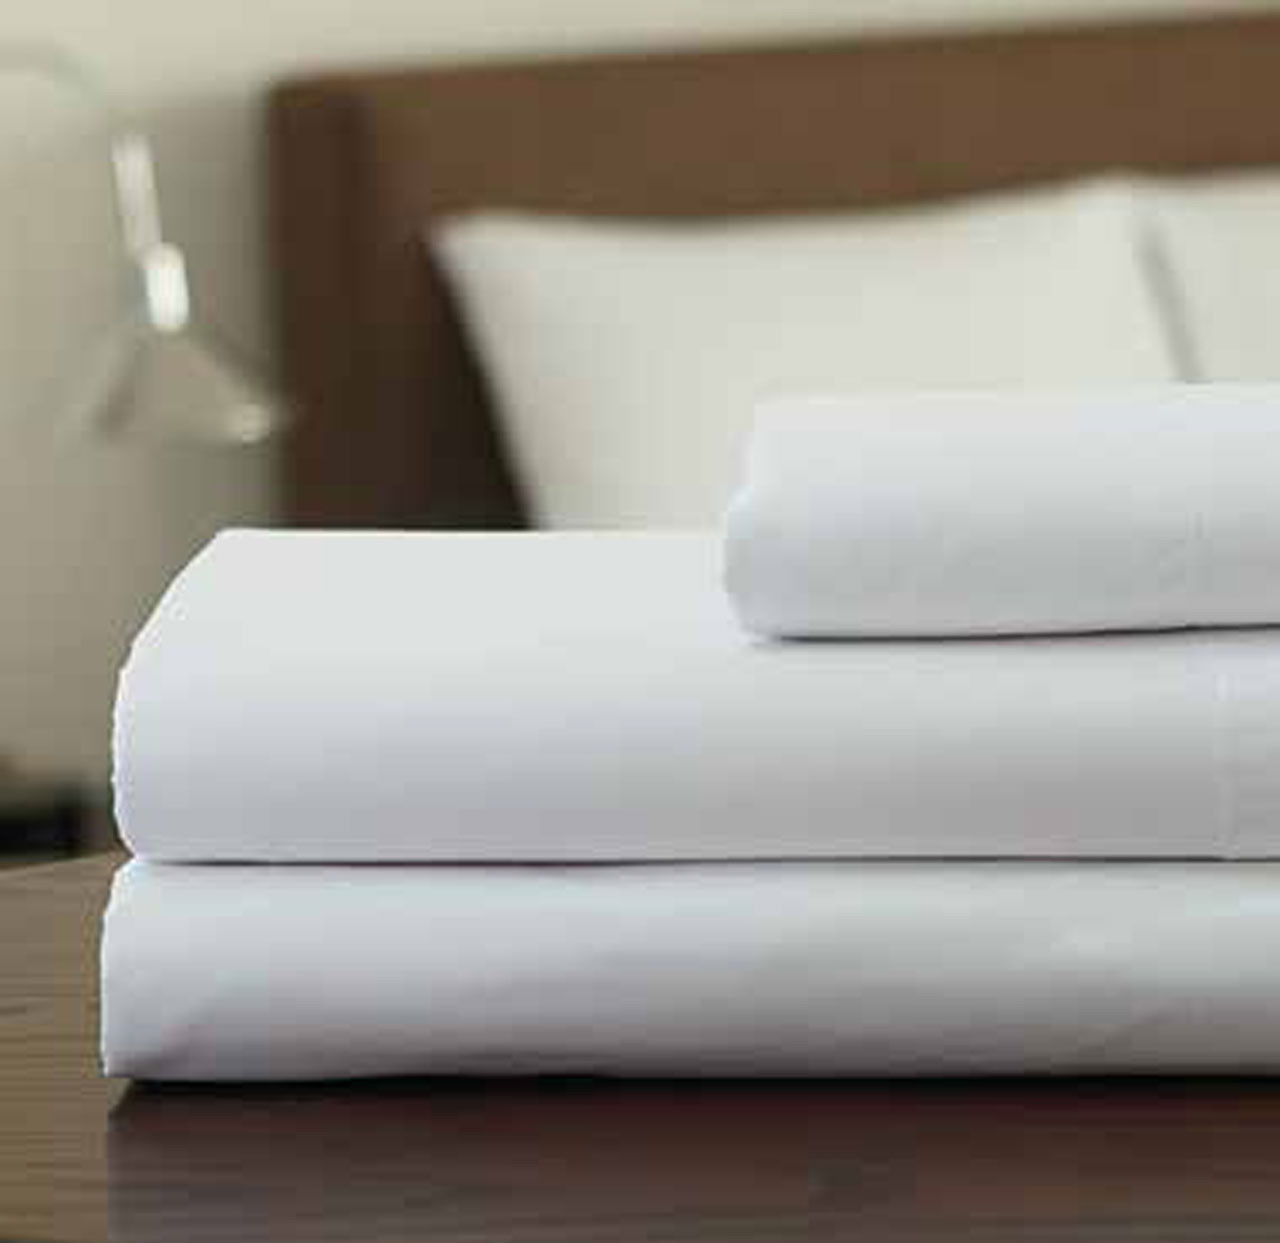 Where will my Weave Welspun sheets ship from?